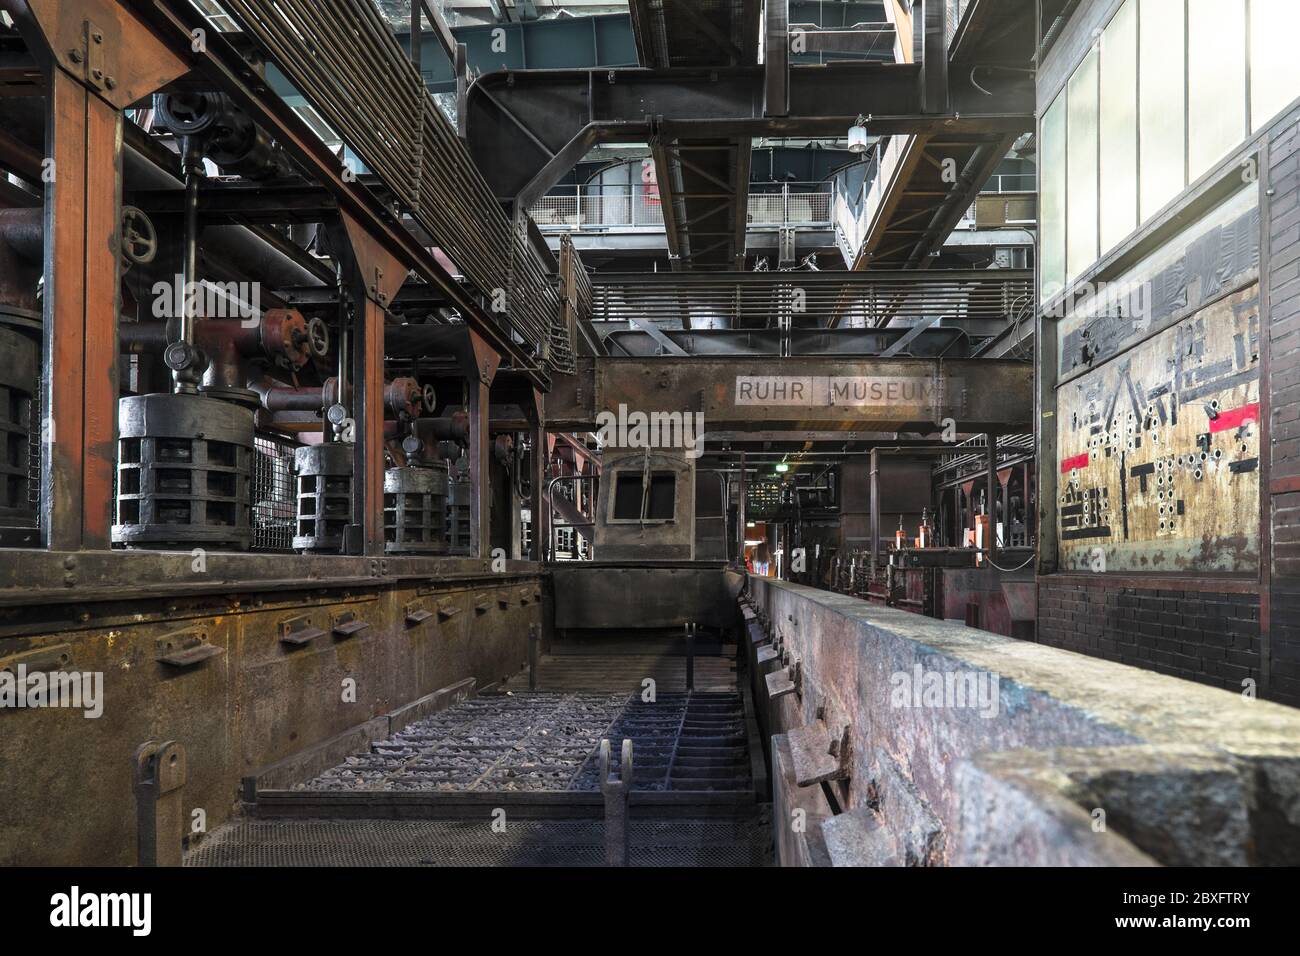 View at the washery of the coal in the Ruhr museum at Zeche Zollverein Coal Mine Industrial Complex Stock Photo